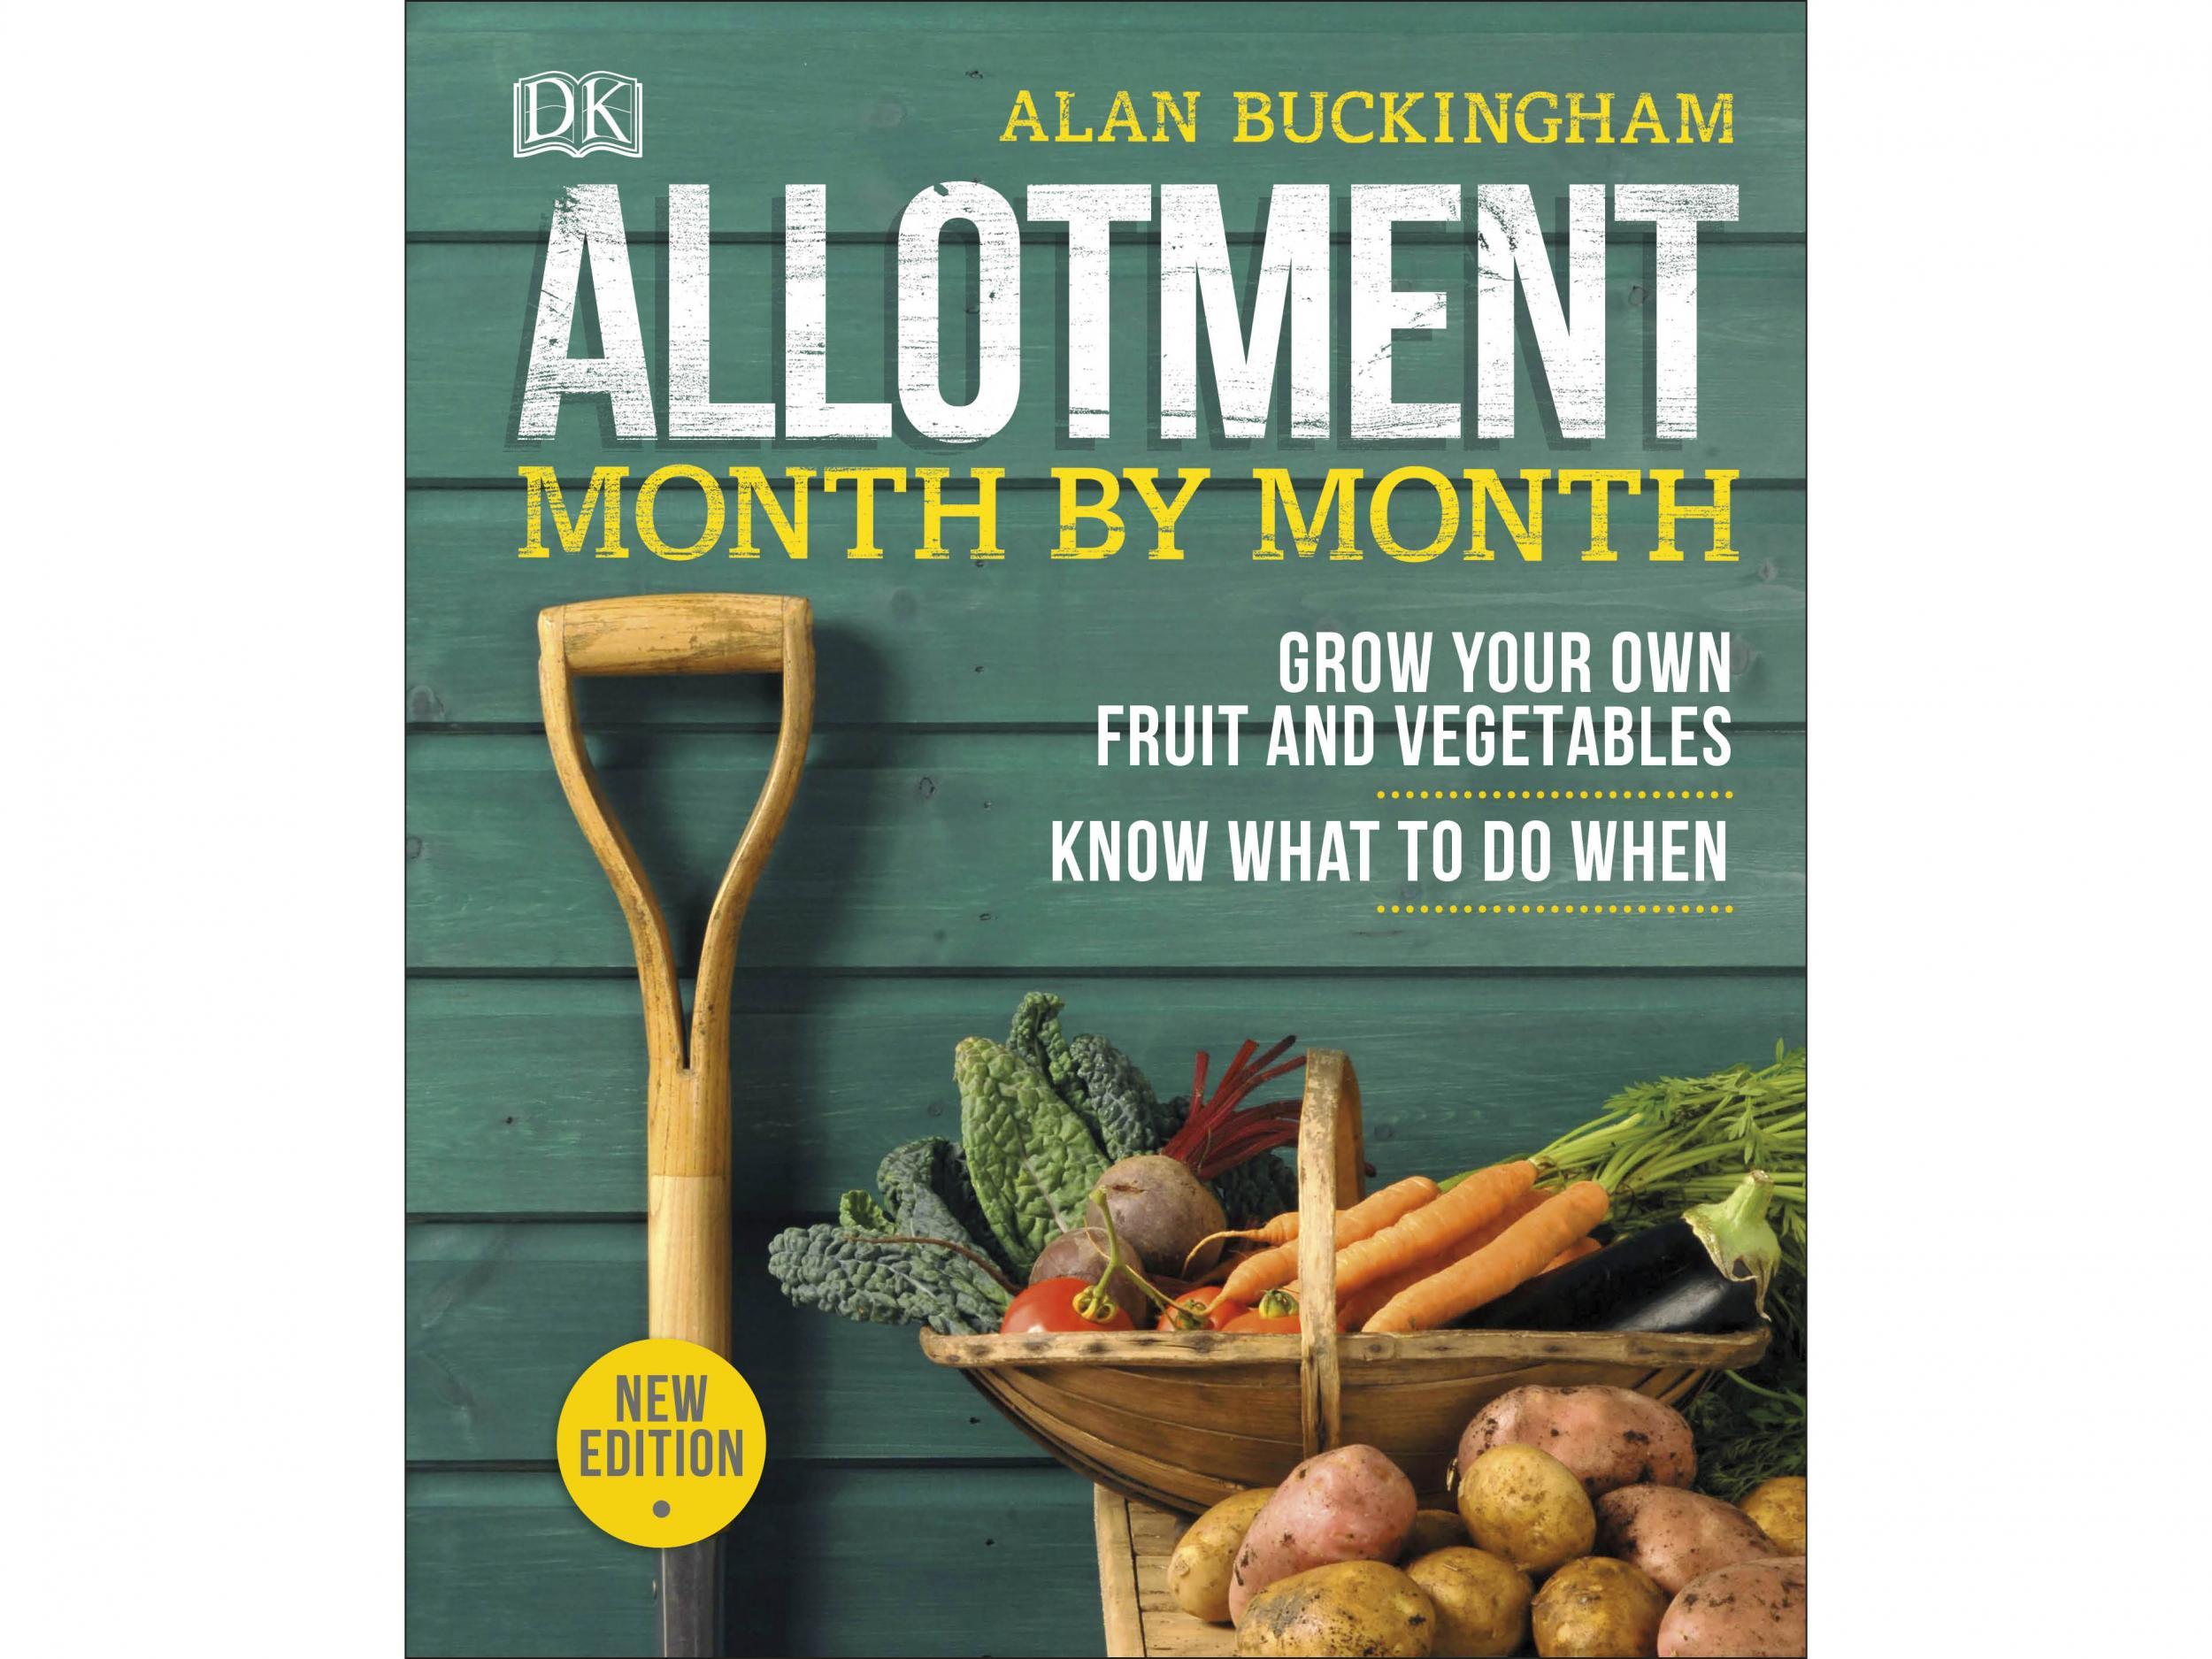 allotment-month-by-month.jpg